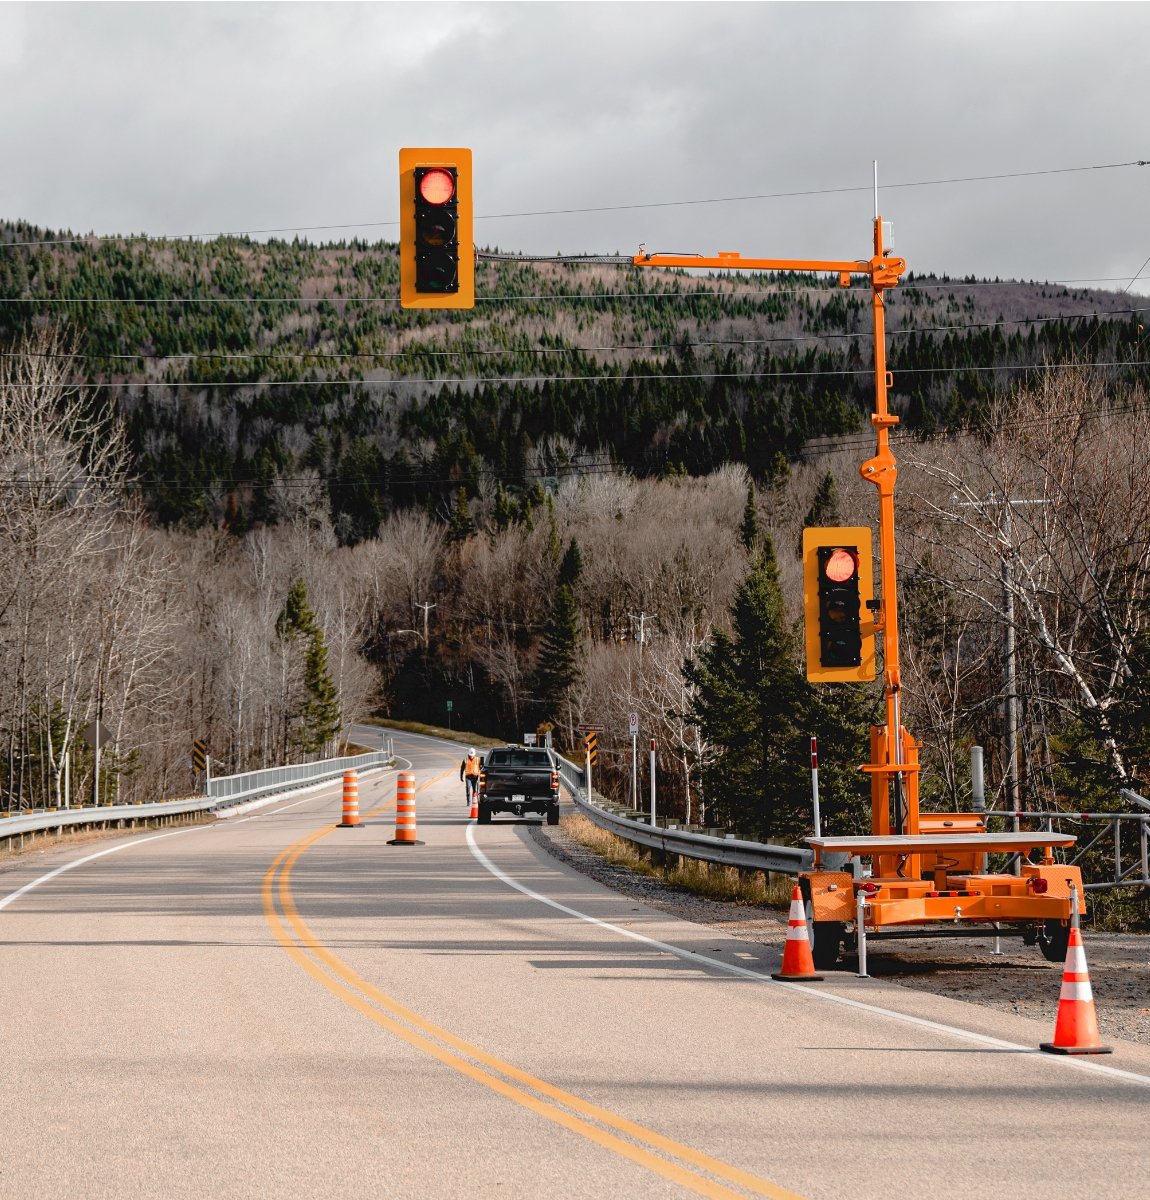 Temporary Traffic signals on a work zone